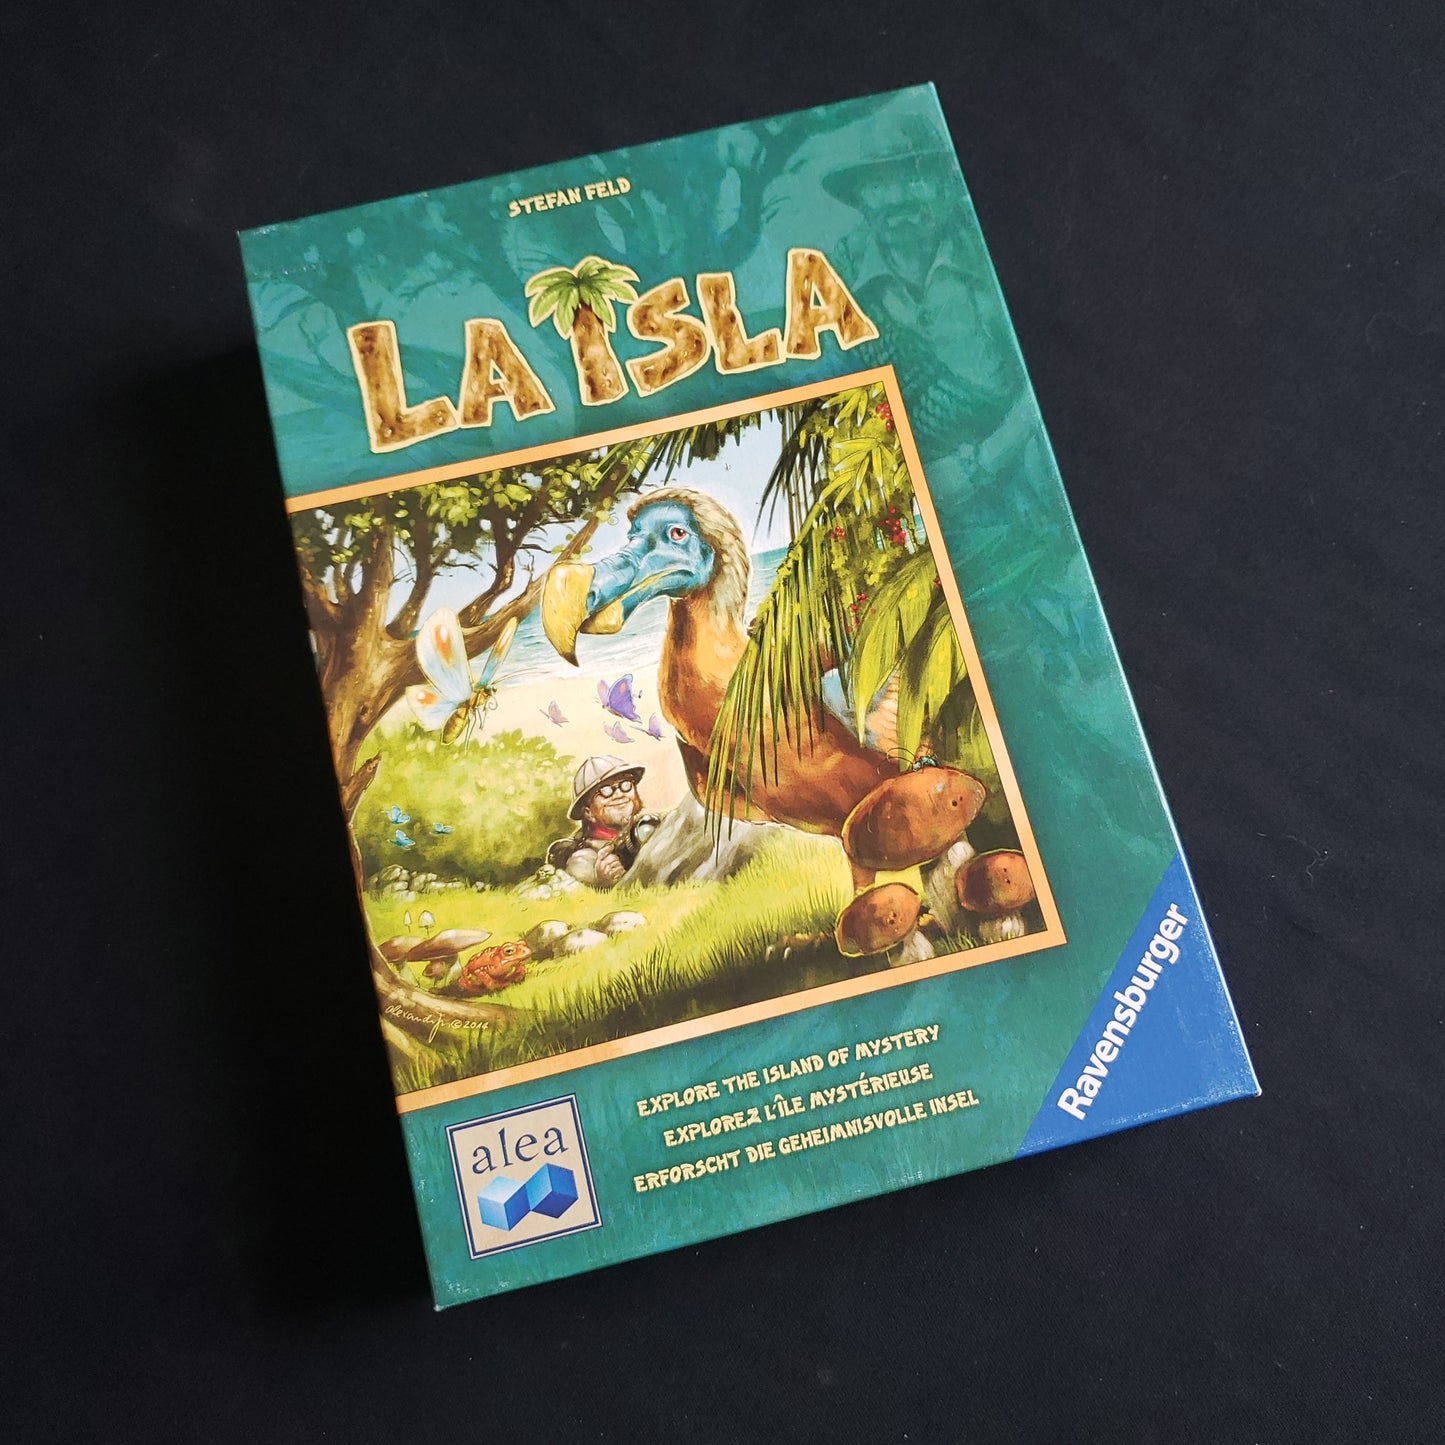 Image shows the front cover of the box of the La Isla board game